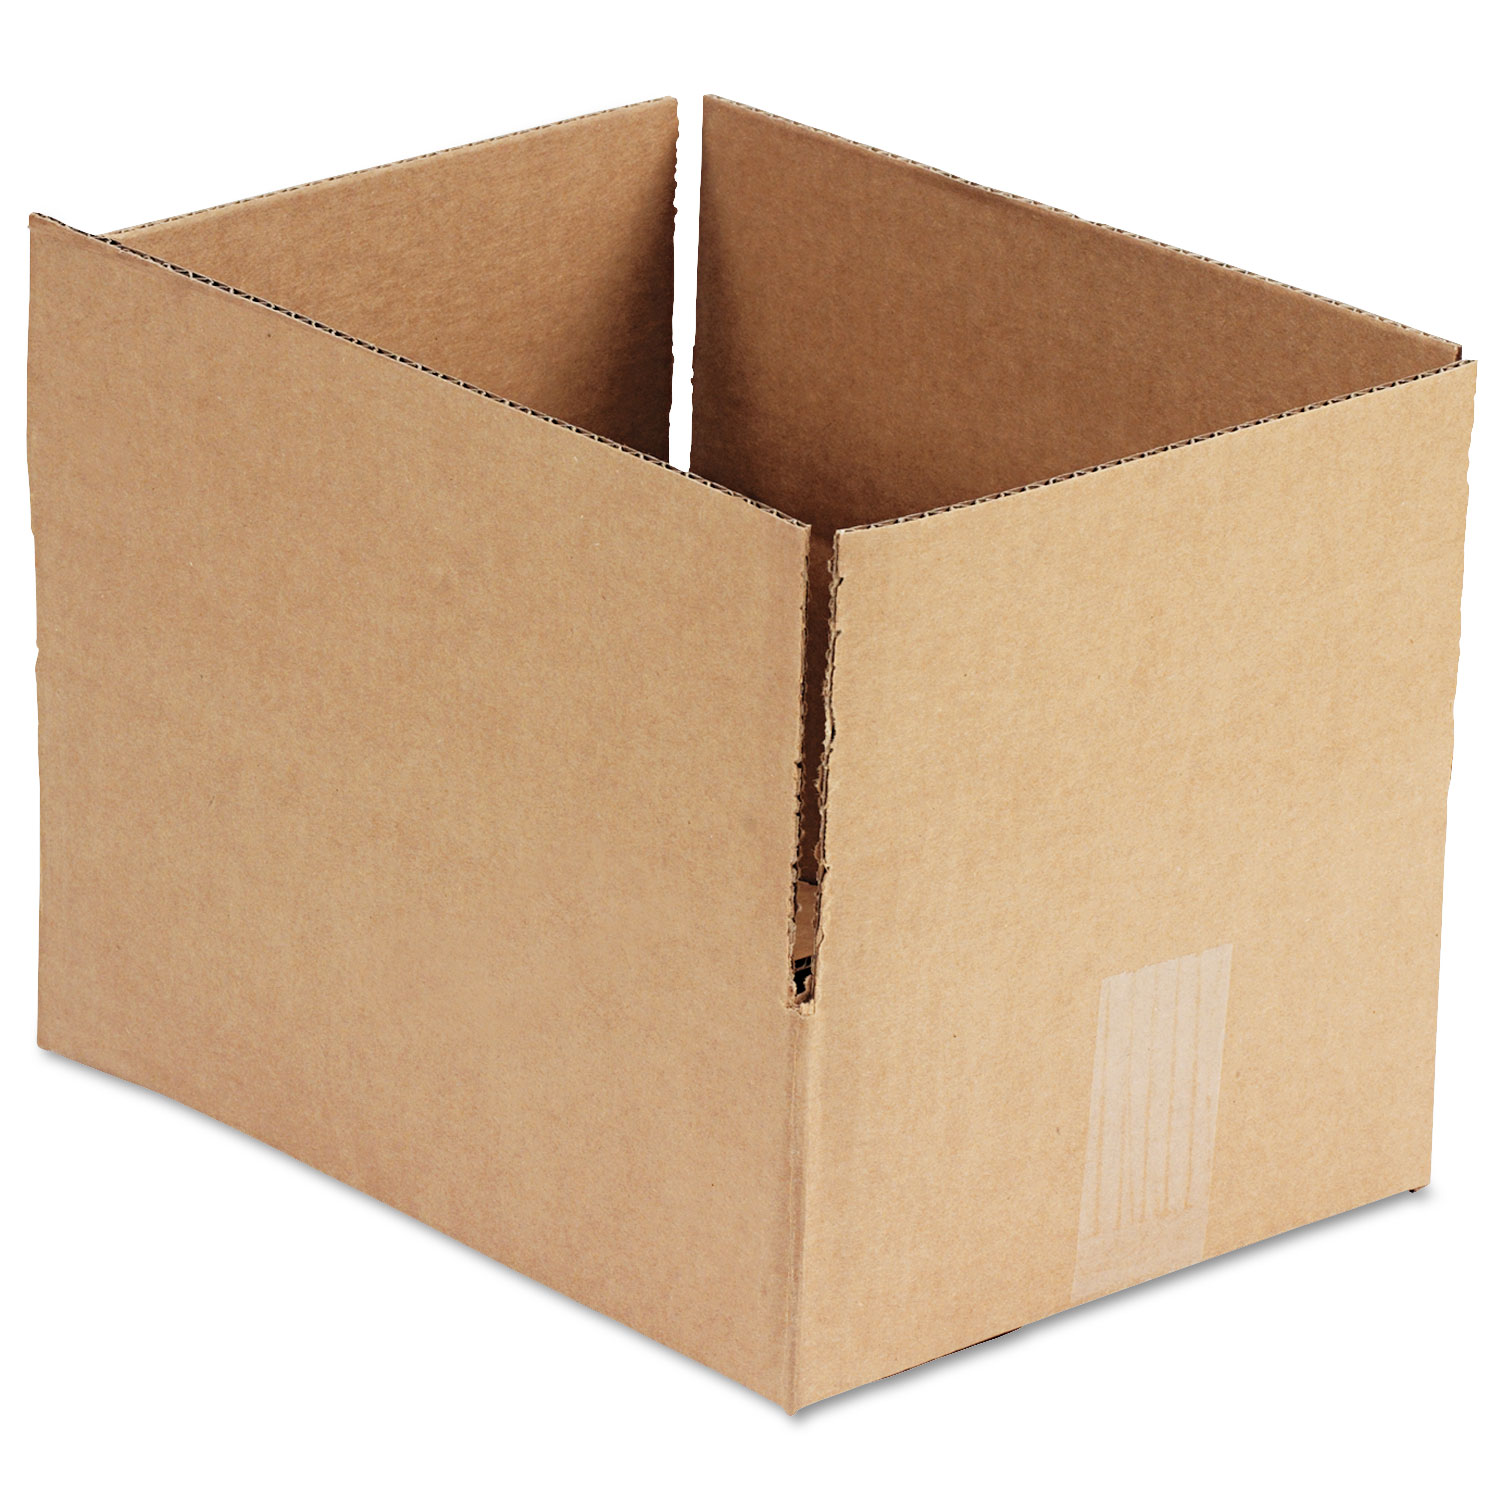  General Supply UFS1294 Fixed-Depth Shipping Boxes, Regular Slotted Container (RSC), 12 x 9 x 4, Brown Kraft, 25/Bundle (UFS1294) 